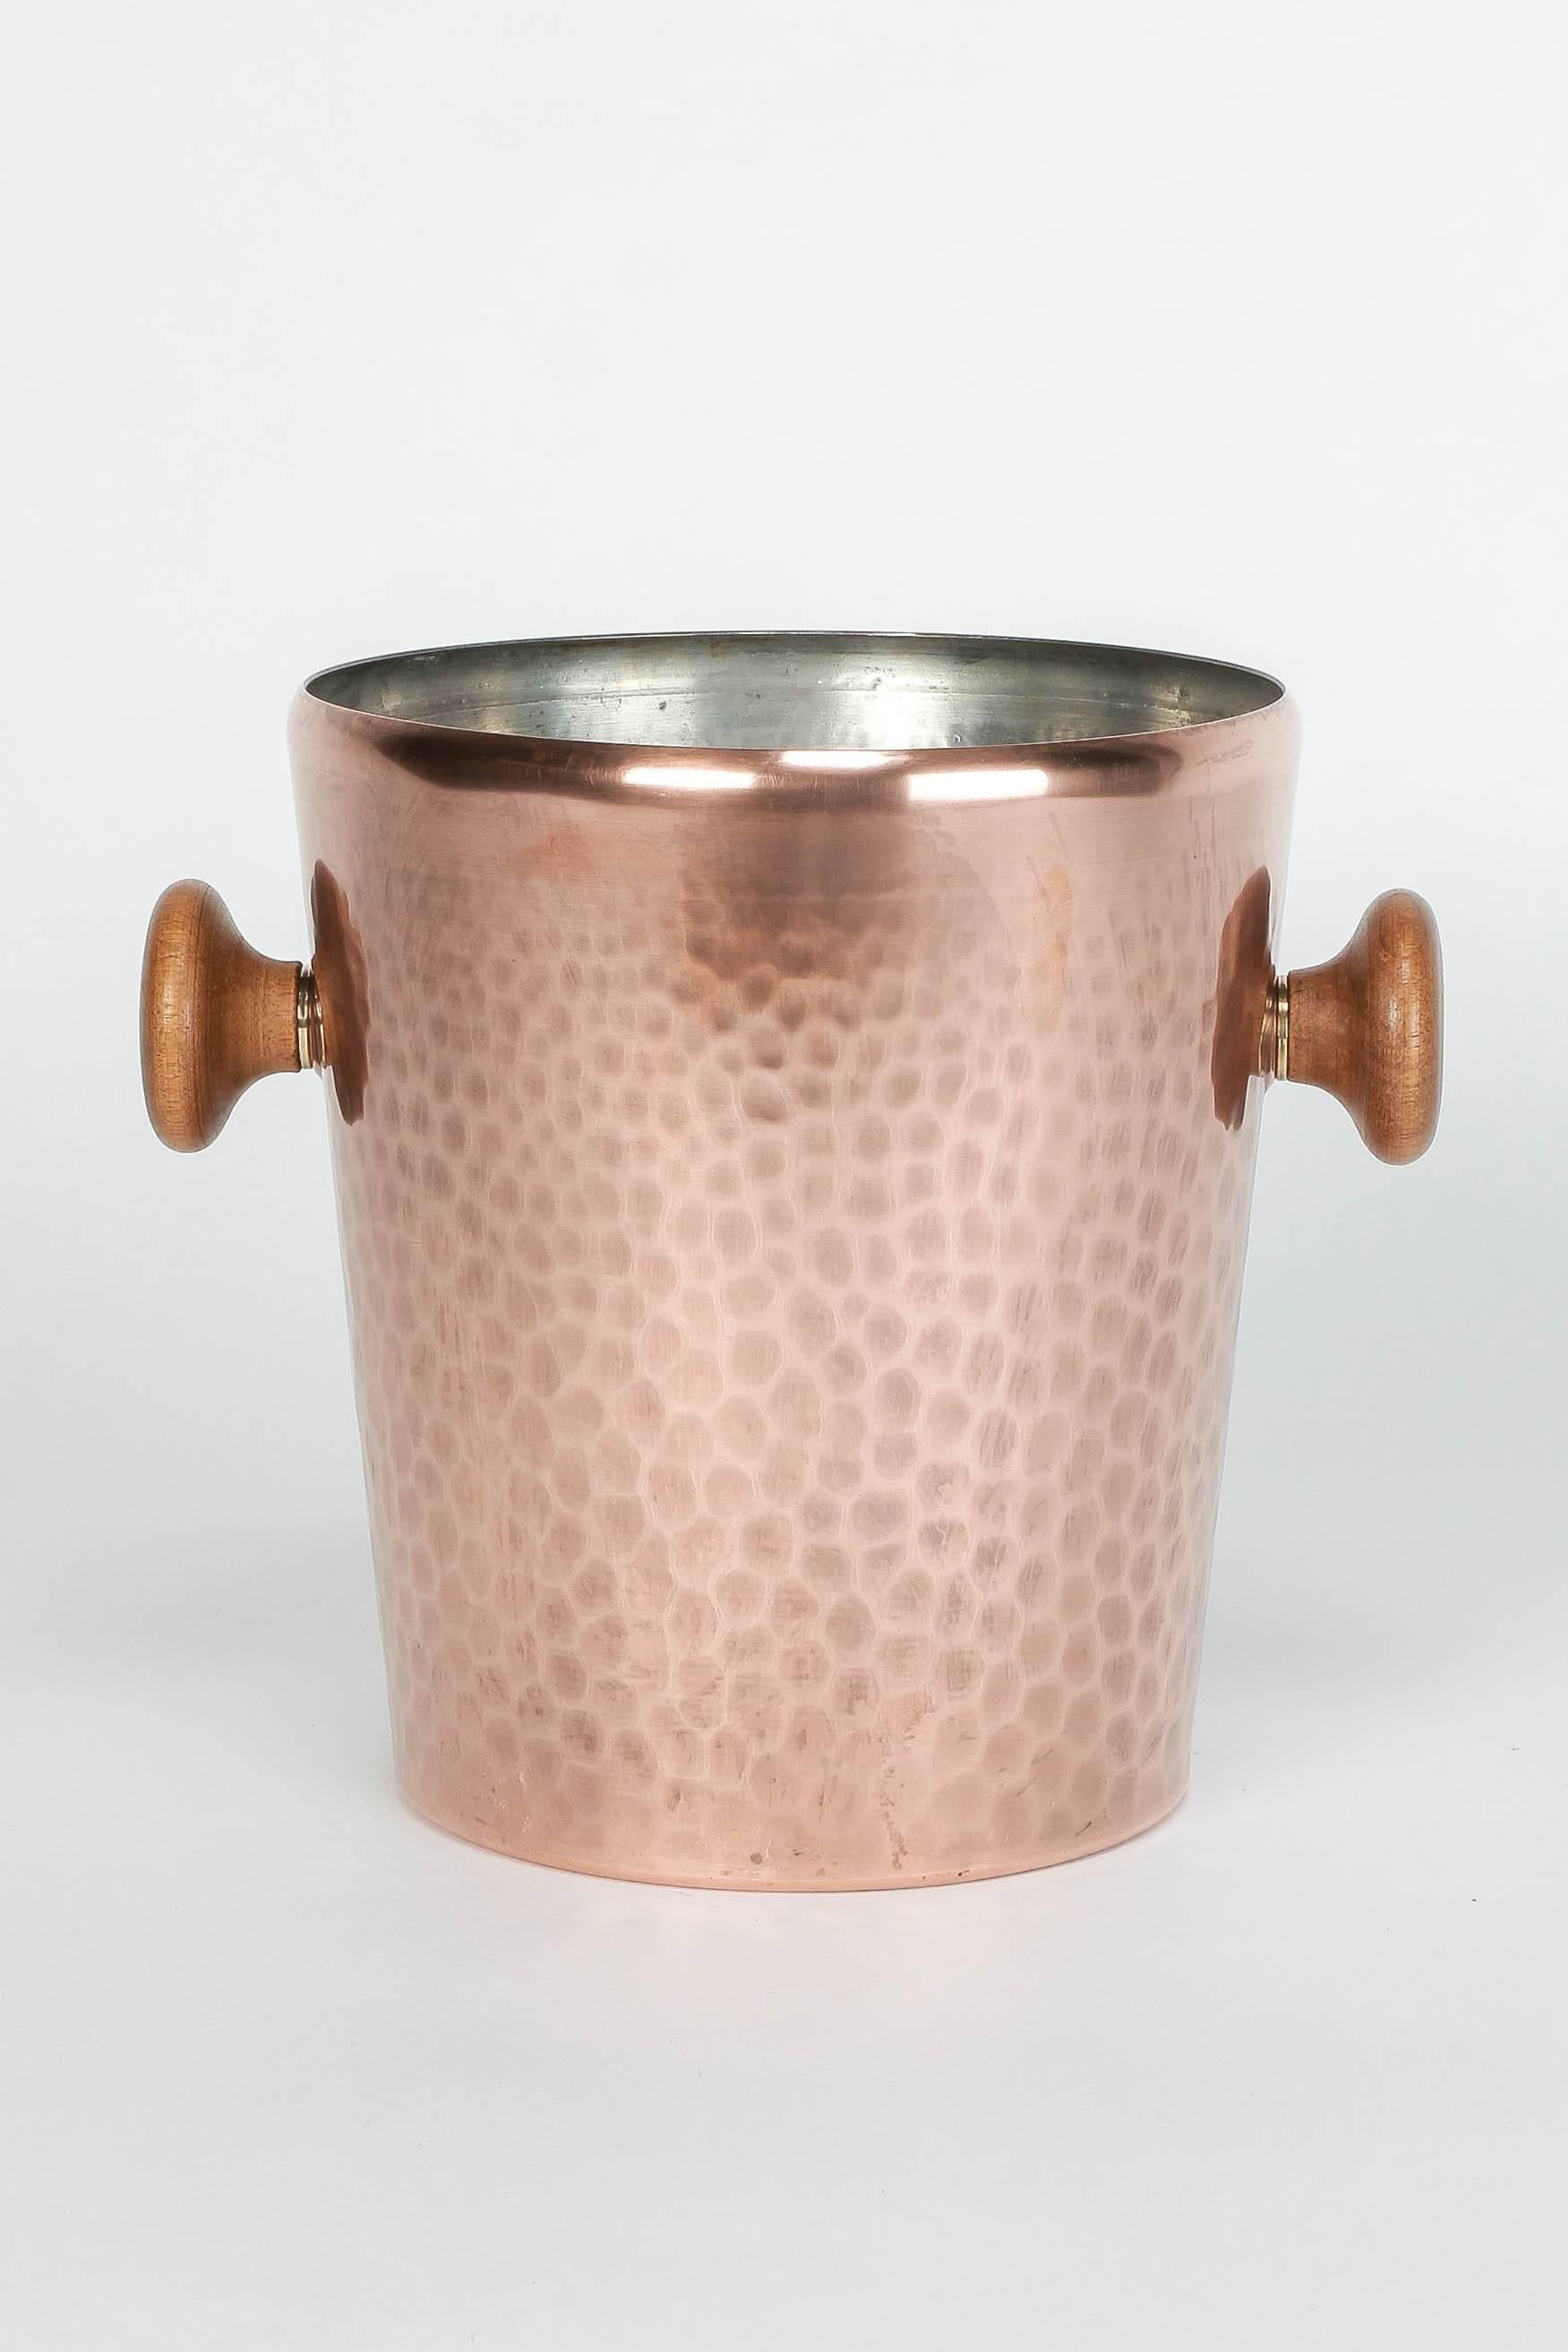 High-end copper ice bucket manufactured by the Swiss producer Stöckli Netstal in the 1950s. Hammered copper with solid walnut handles and brass details.